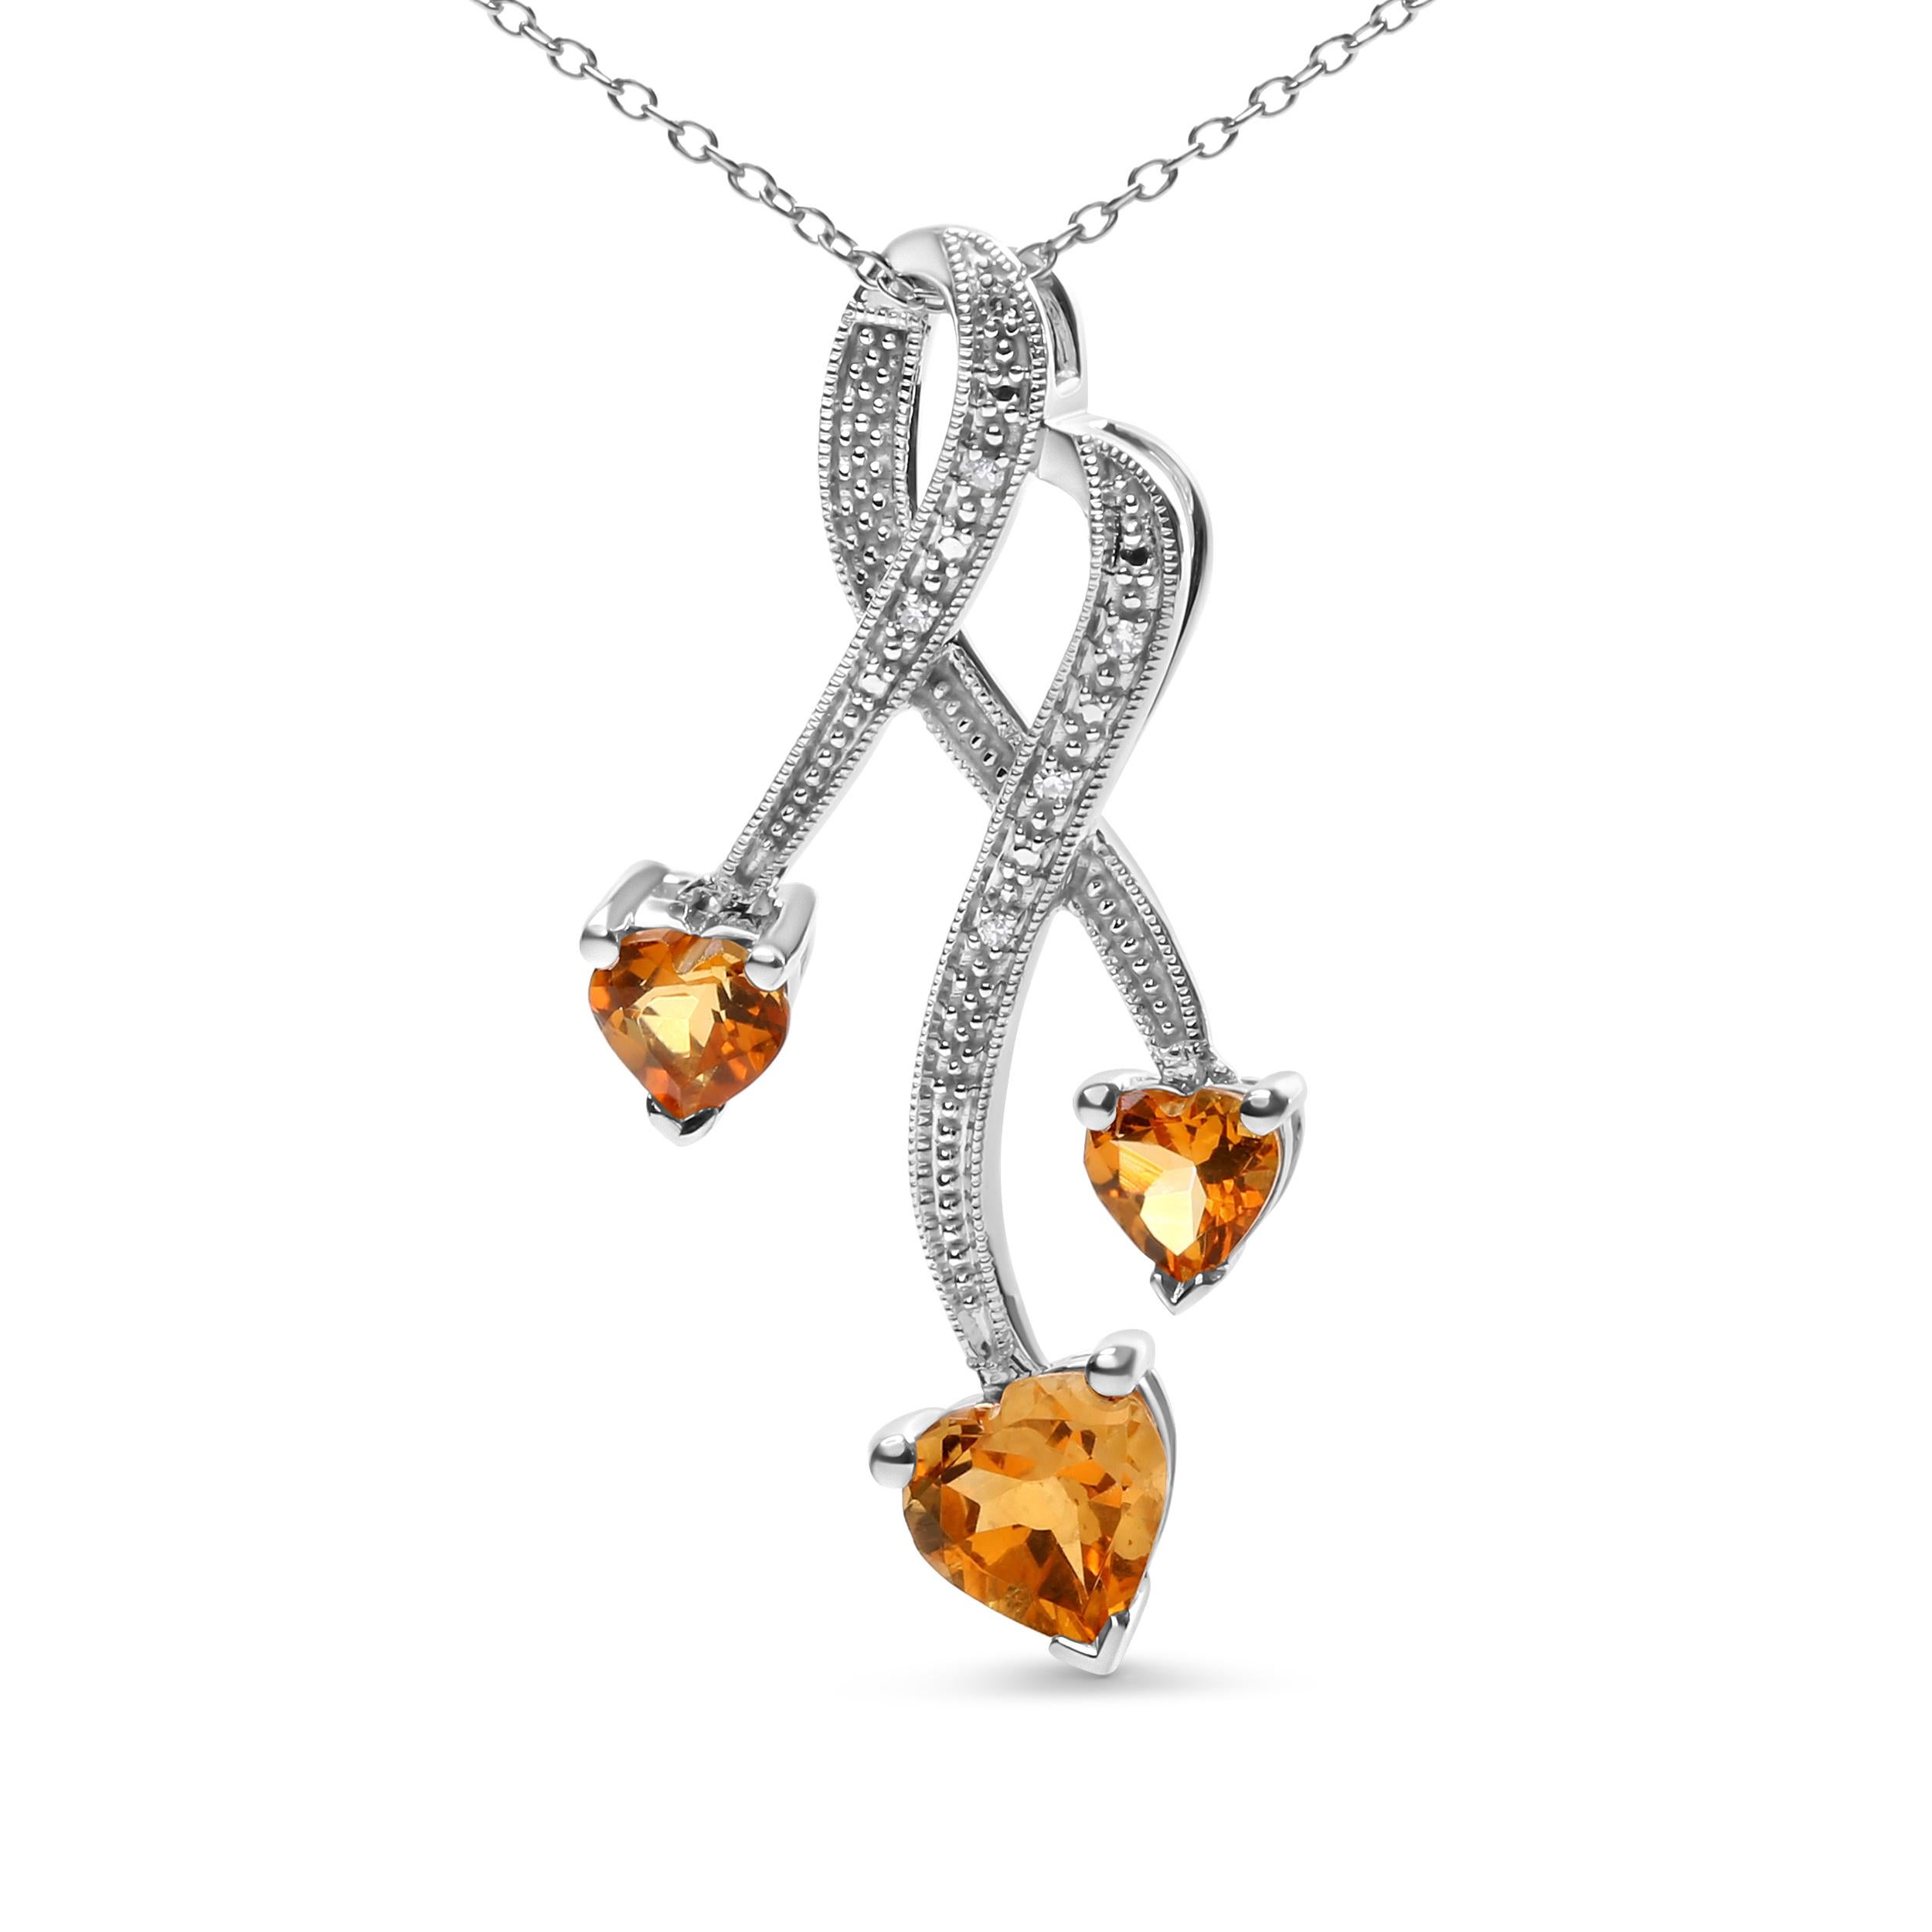 This stunning .925 sterling silver pendant necklace is the perfect way to add a touch of elegance and sophistication to any outfit. Featuring three natural heart-shaped yellow citrines, totaling 2.01 cttw, that have been heat-treated to achieve